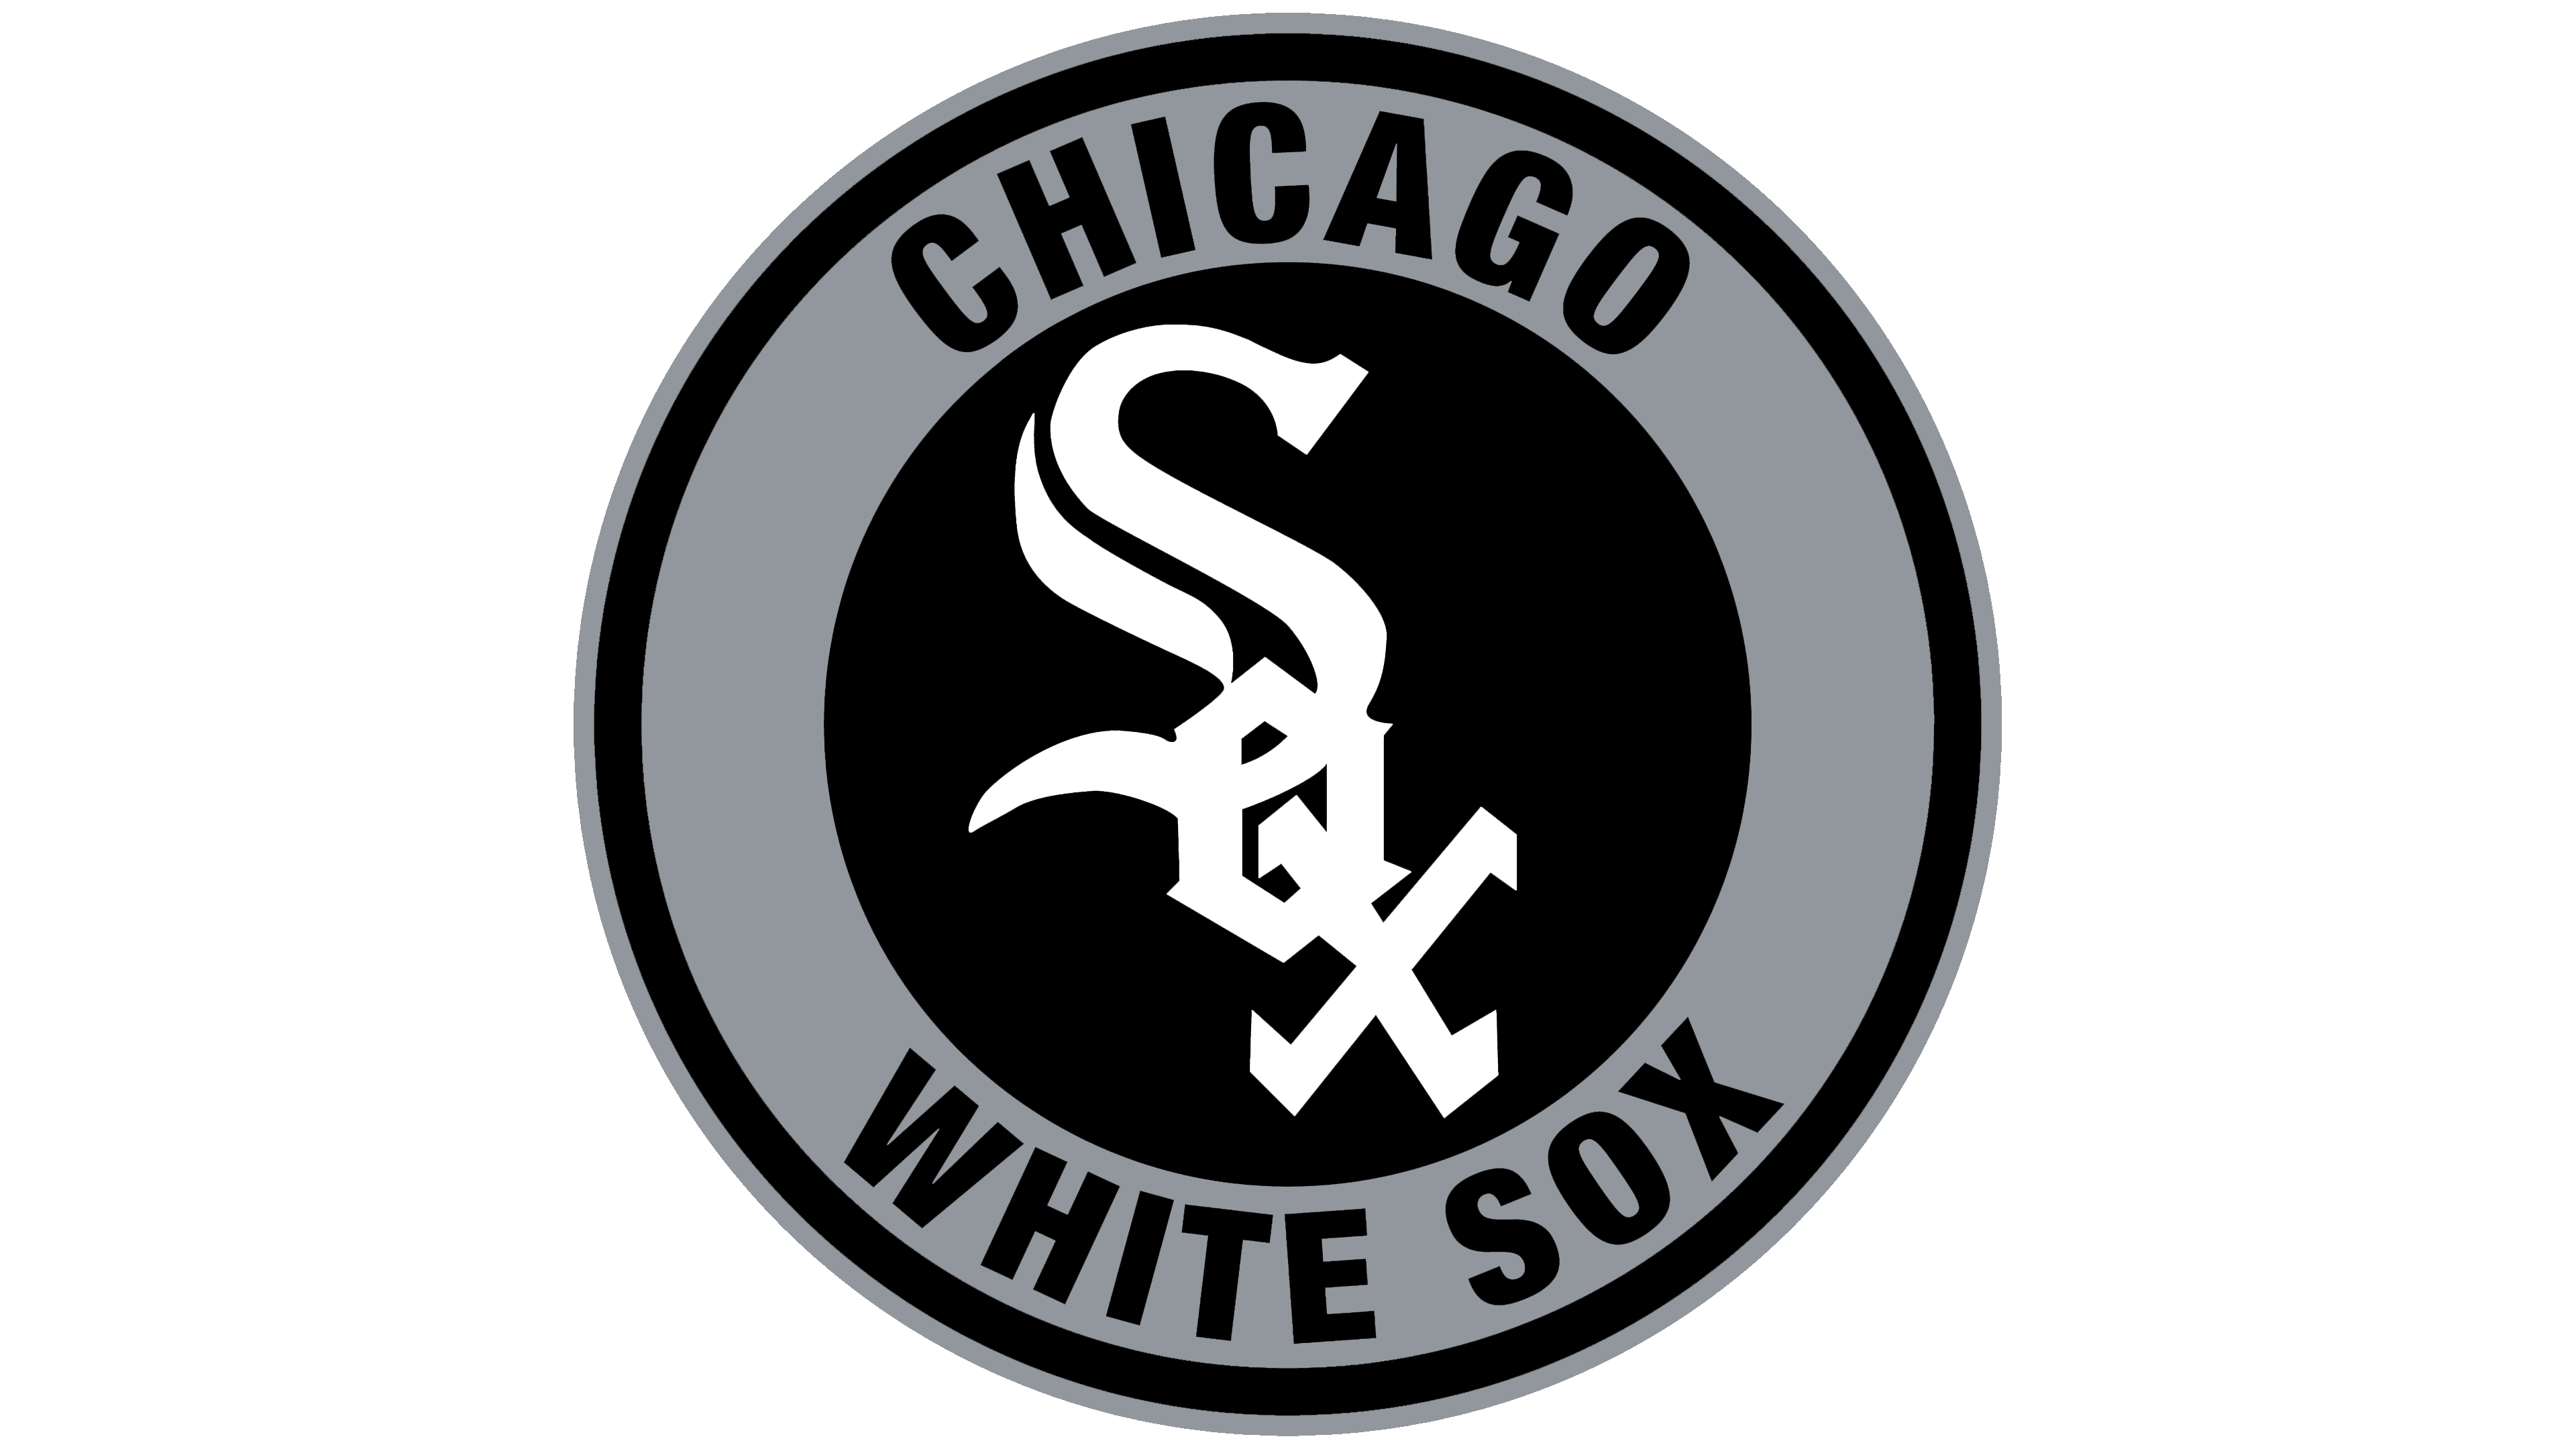 White Sox Logo Png PNG Image Collection